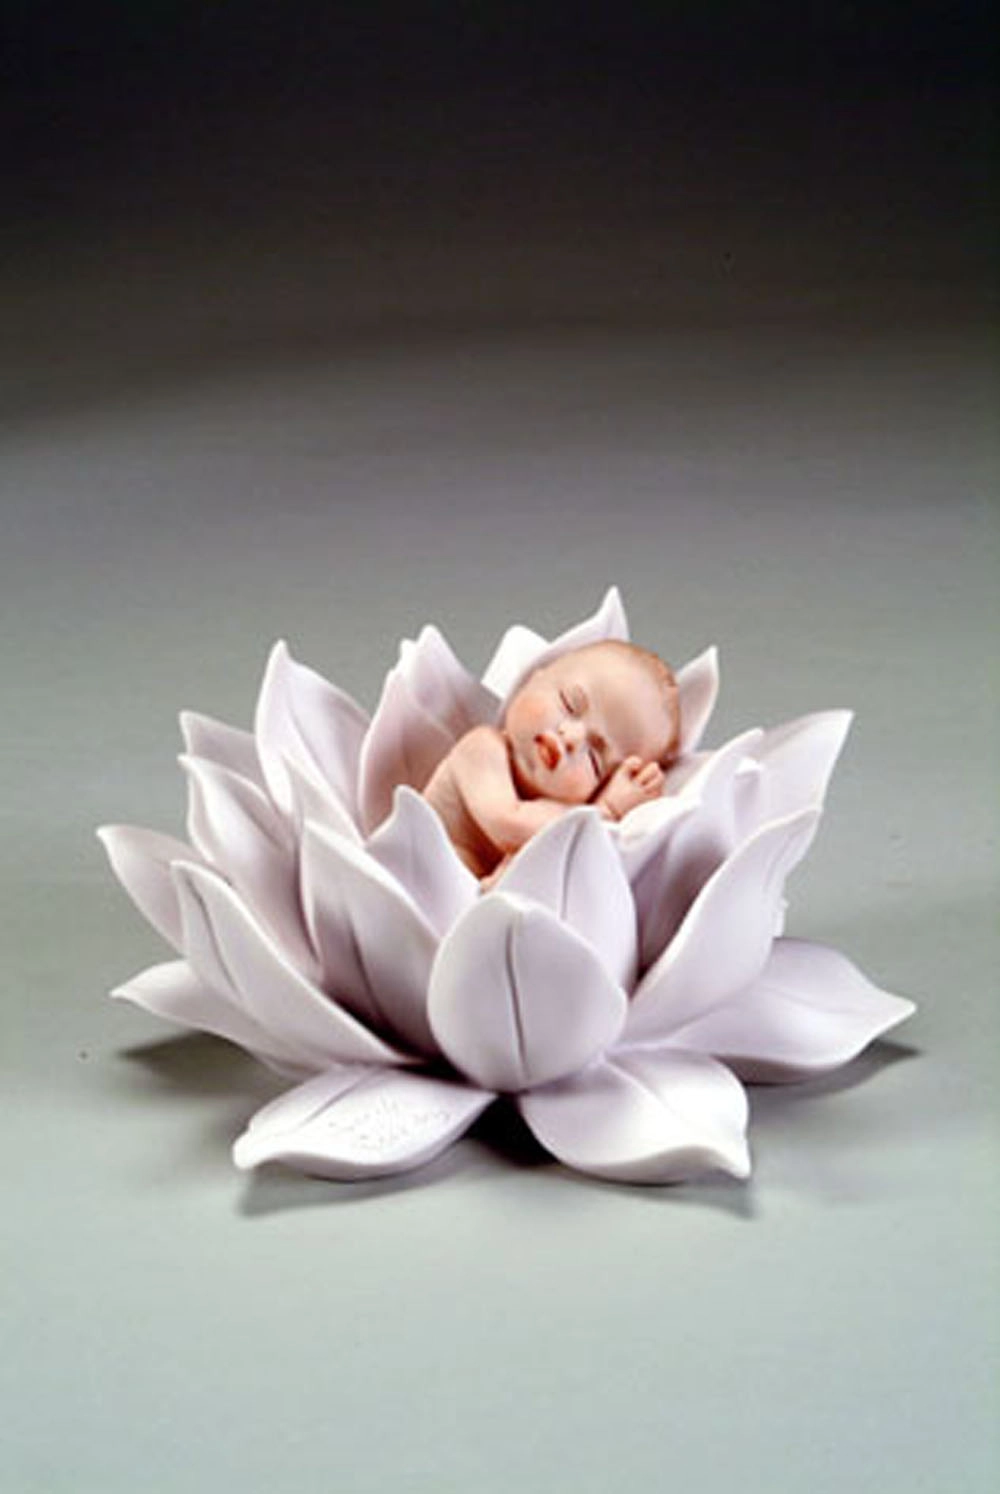 Giuseppe Armani Water Lily Baby Sculpture